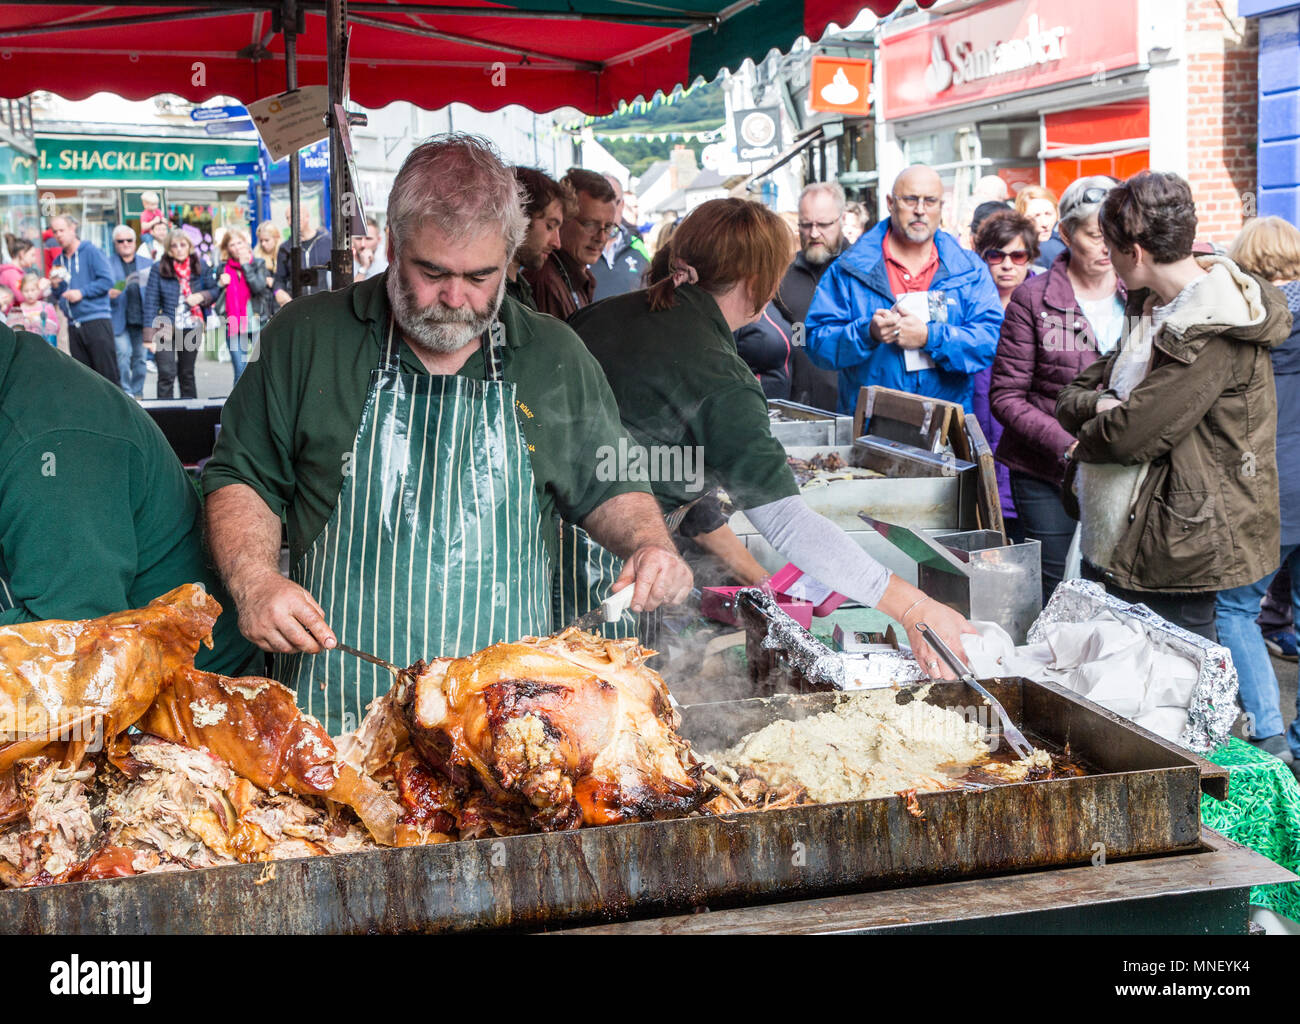 Carving roast port at market stall in street, Abergavenny Food Festival, Wales, UK Stock Photo